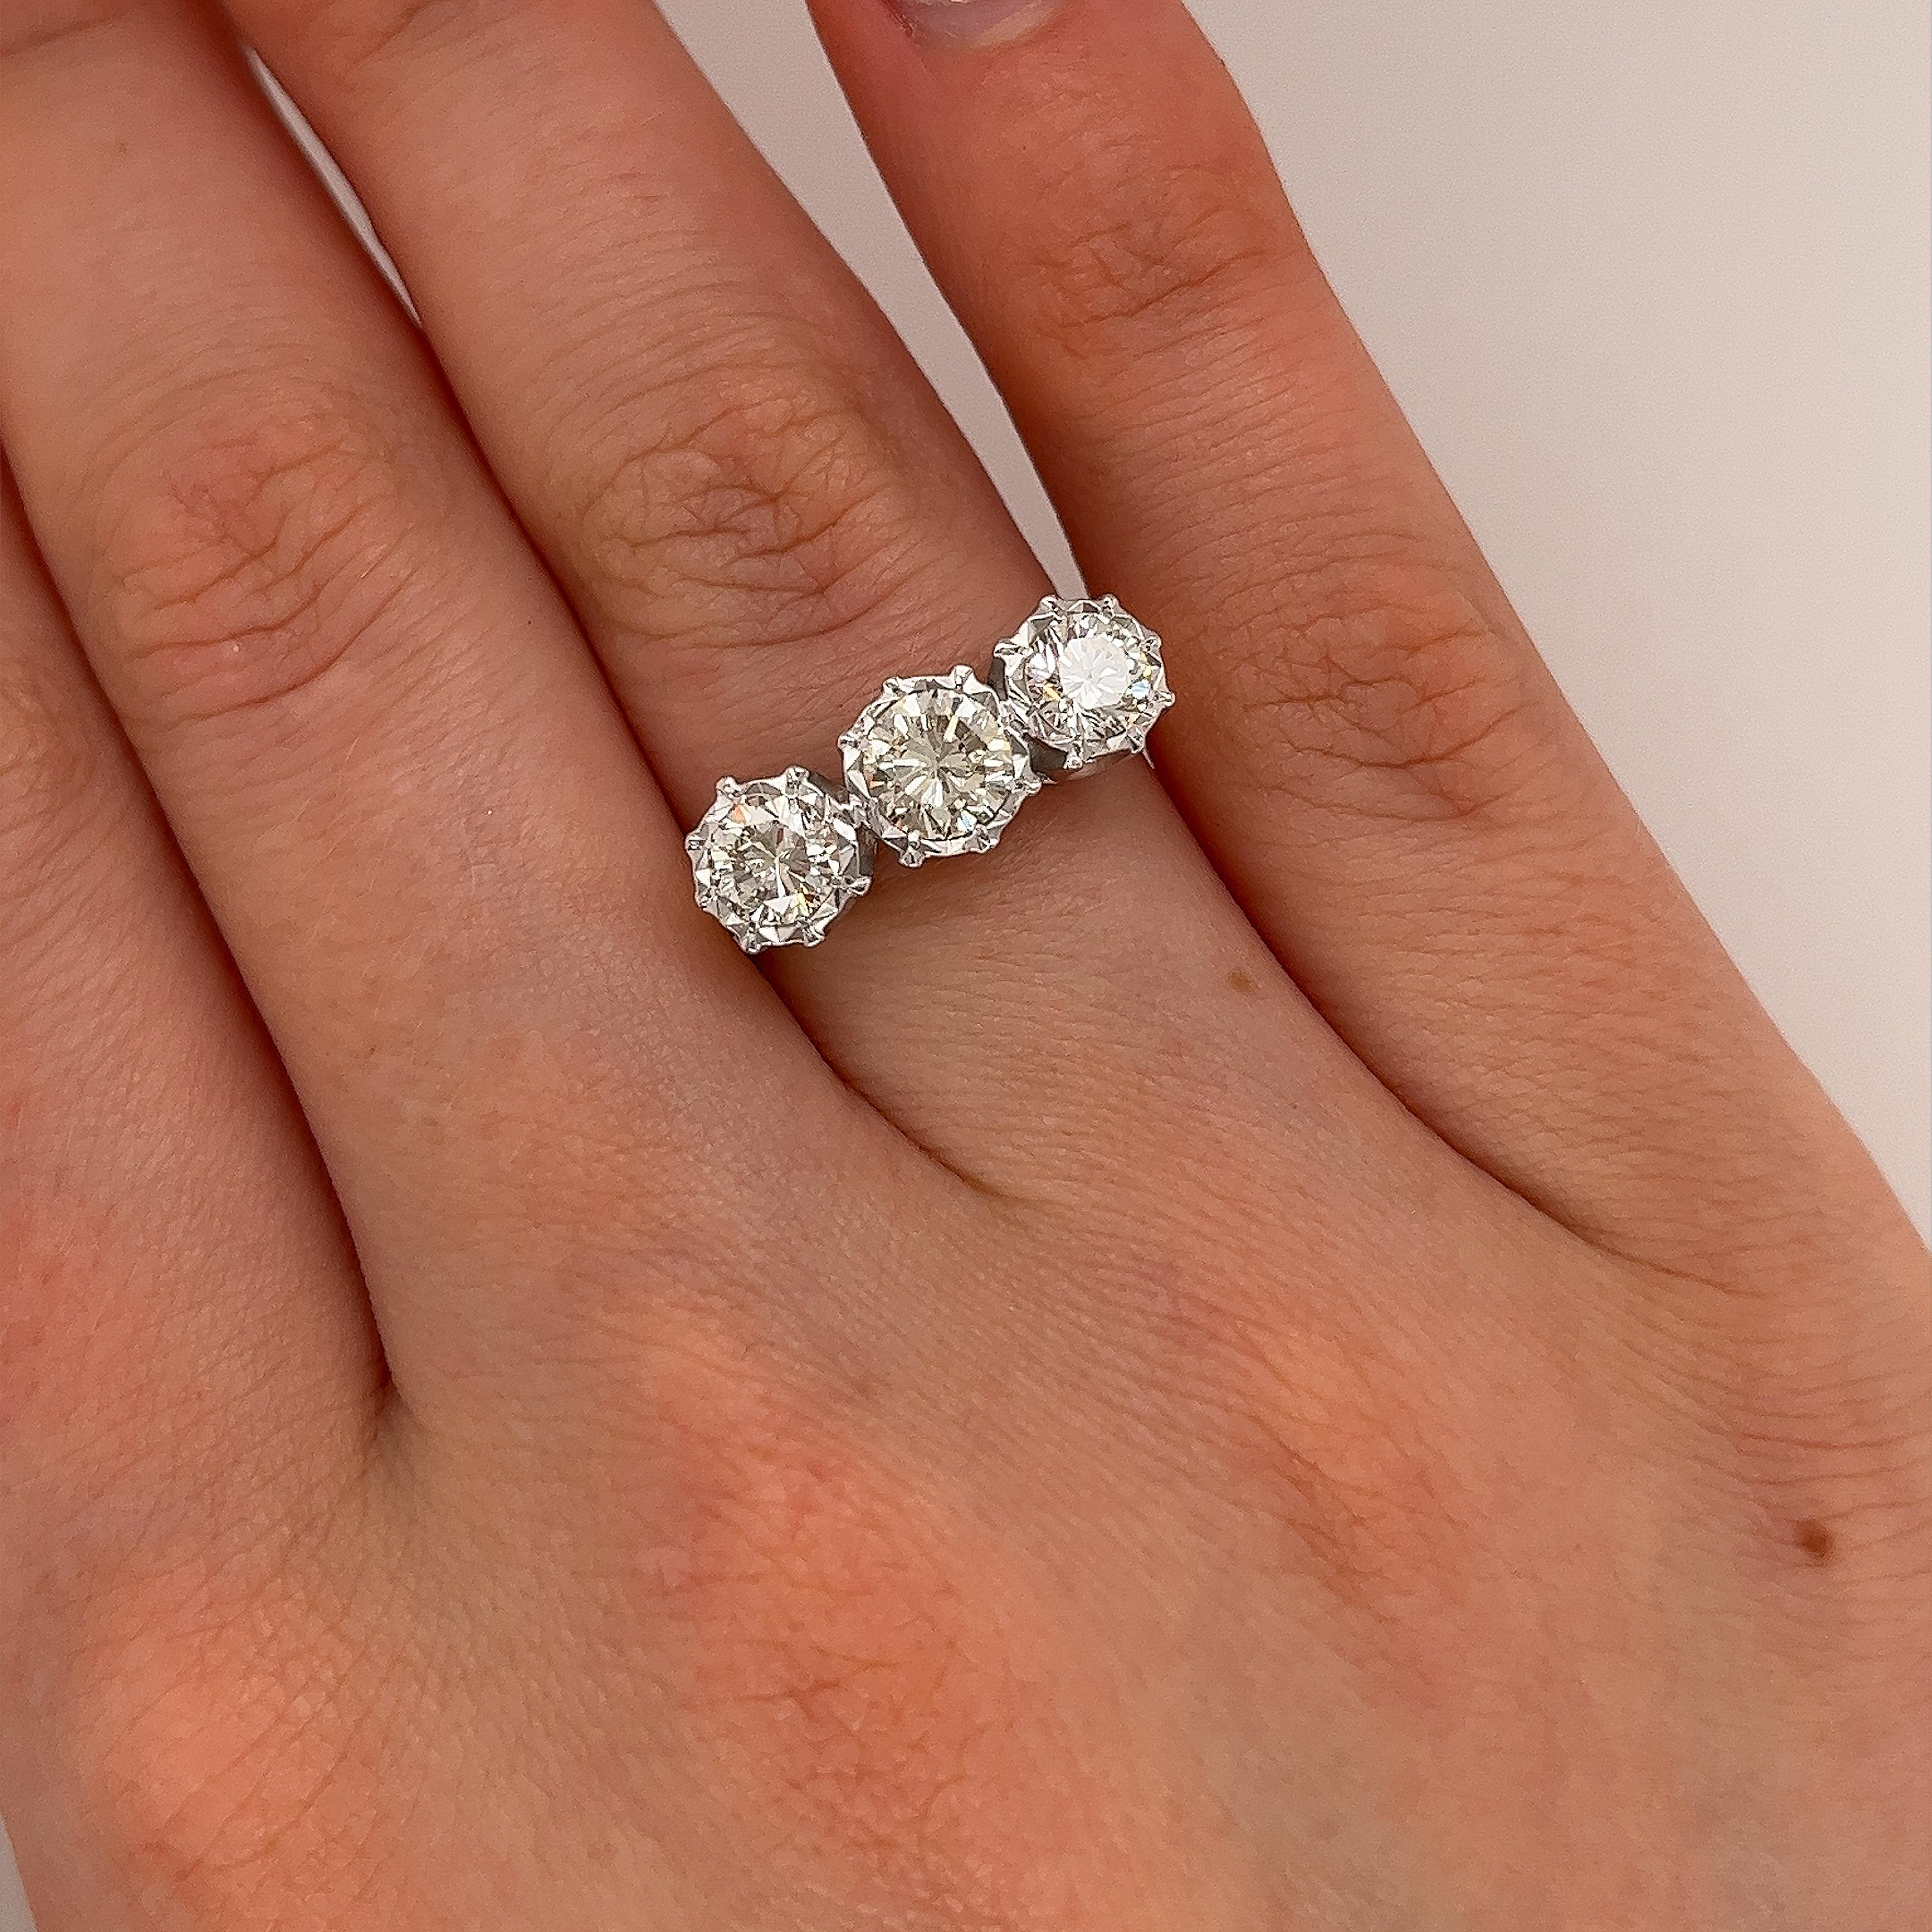 An 18ct Yellow & White Gold 3 Stone Diamond Ring, 
set with 1.46ct natural diamonds, is a stunning and versatile piece.
With a total carat weight of 1.46ct, this ring features diamonds 
that are substantial in size and presence, ensuring a